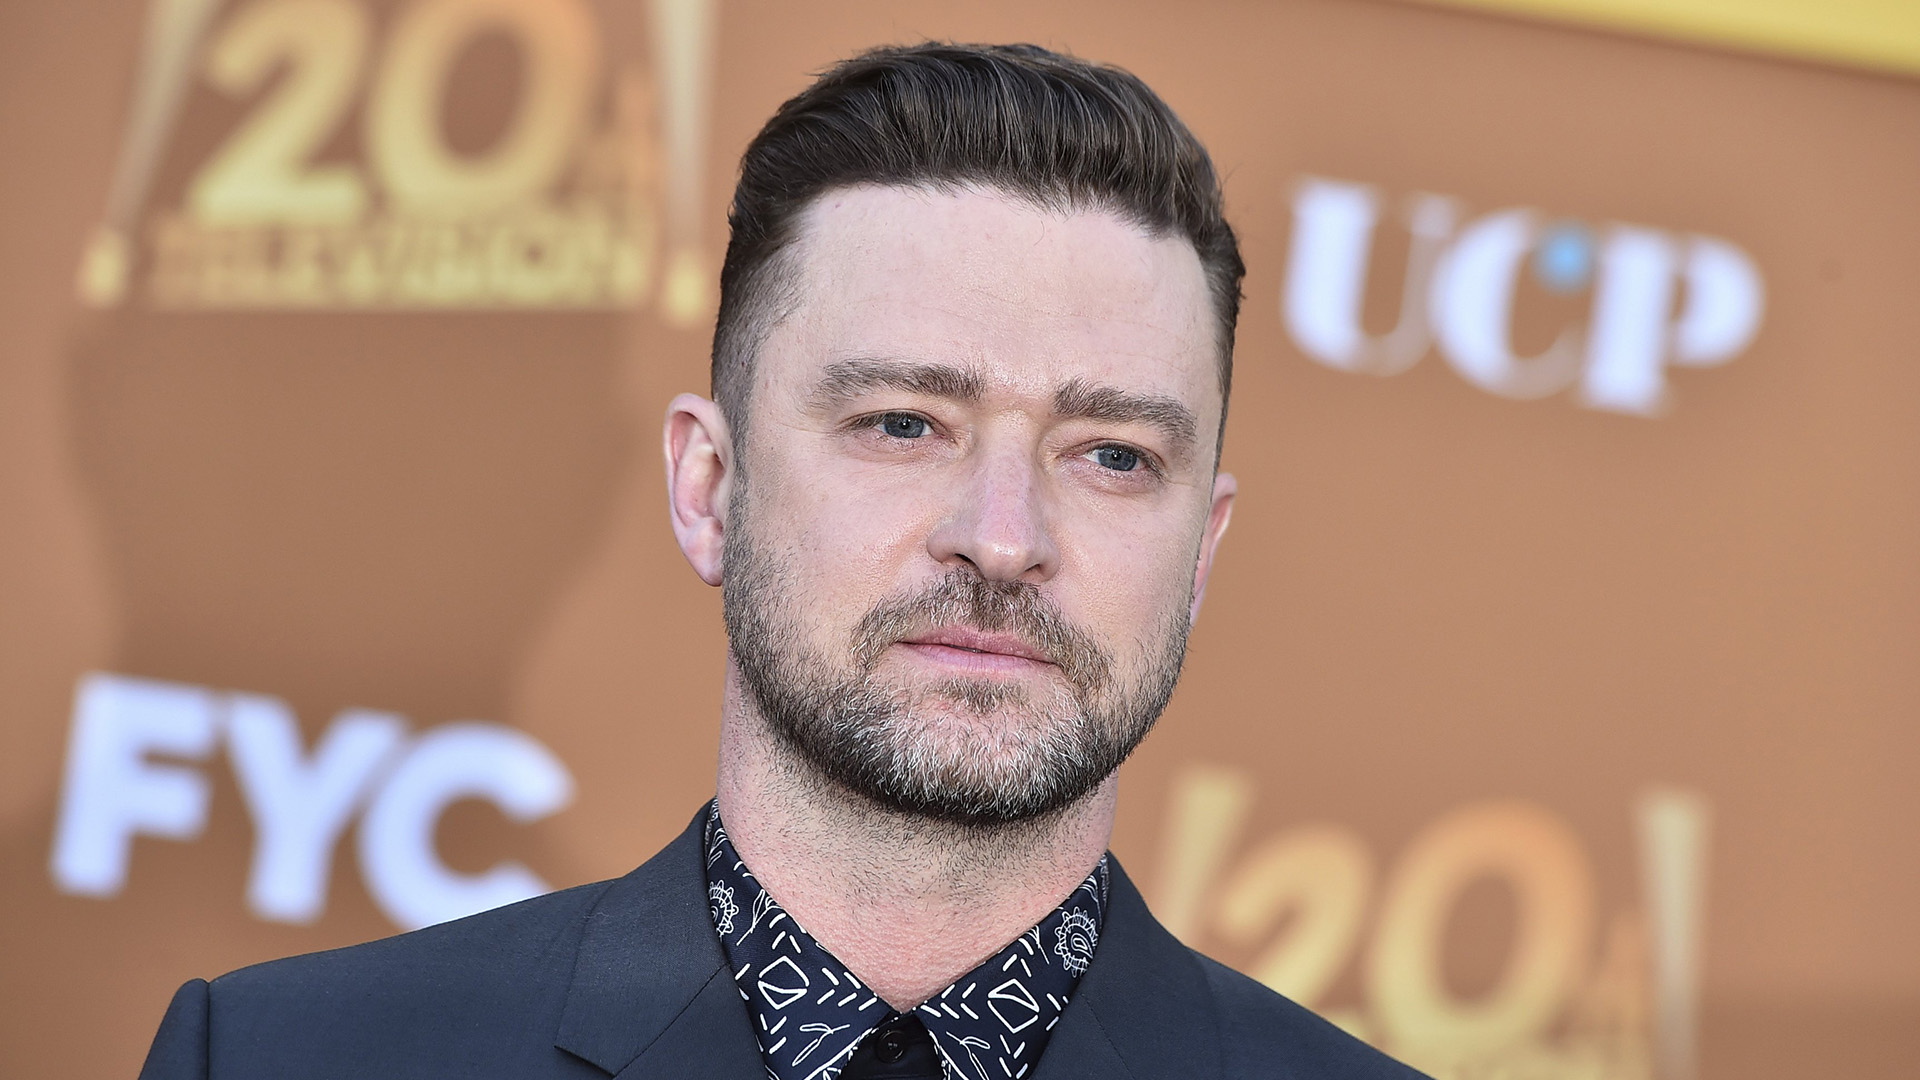 Court documents reveal new details in Justin Timberlake's arrest